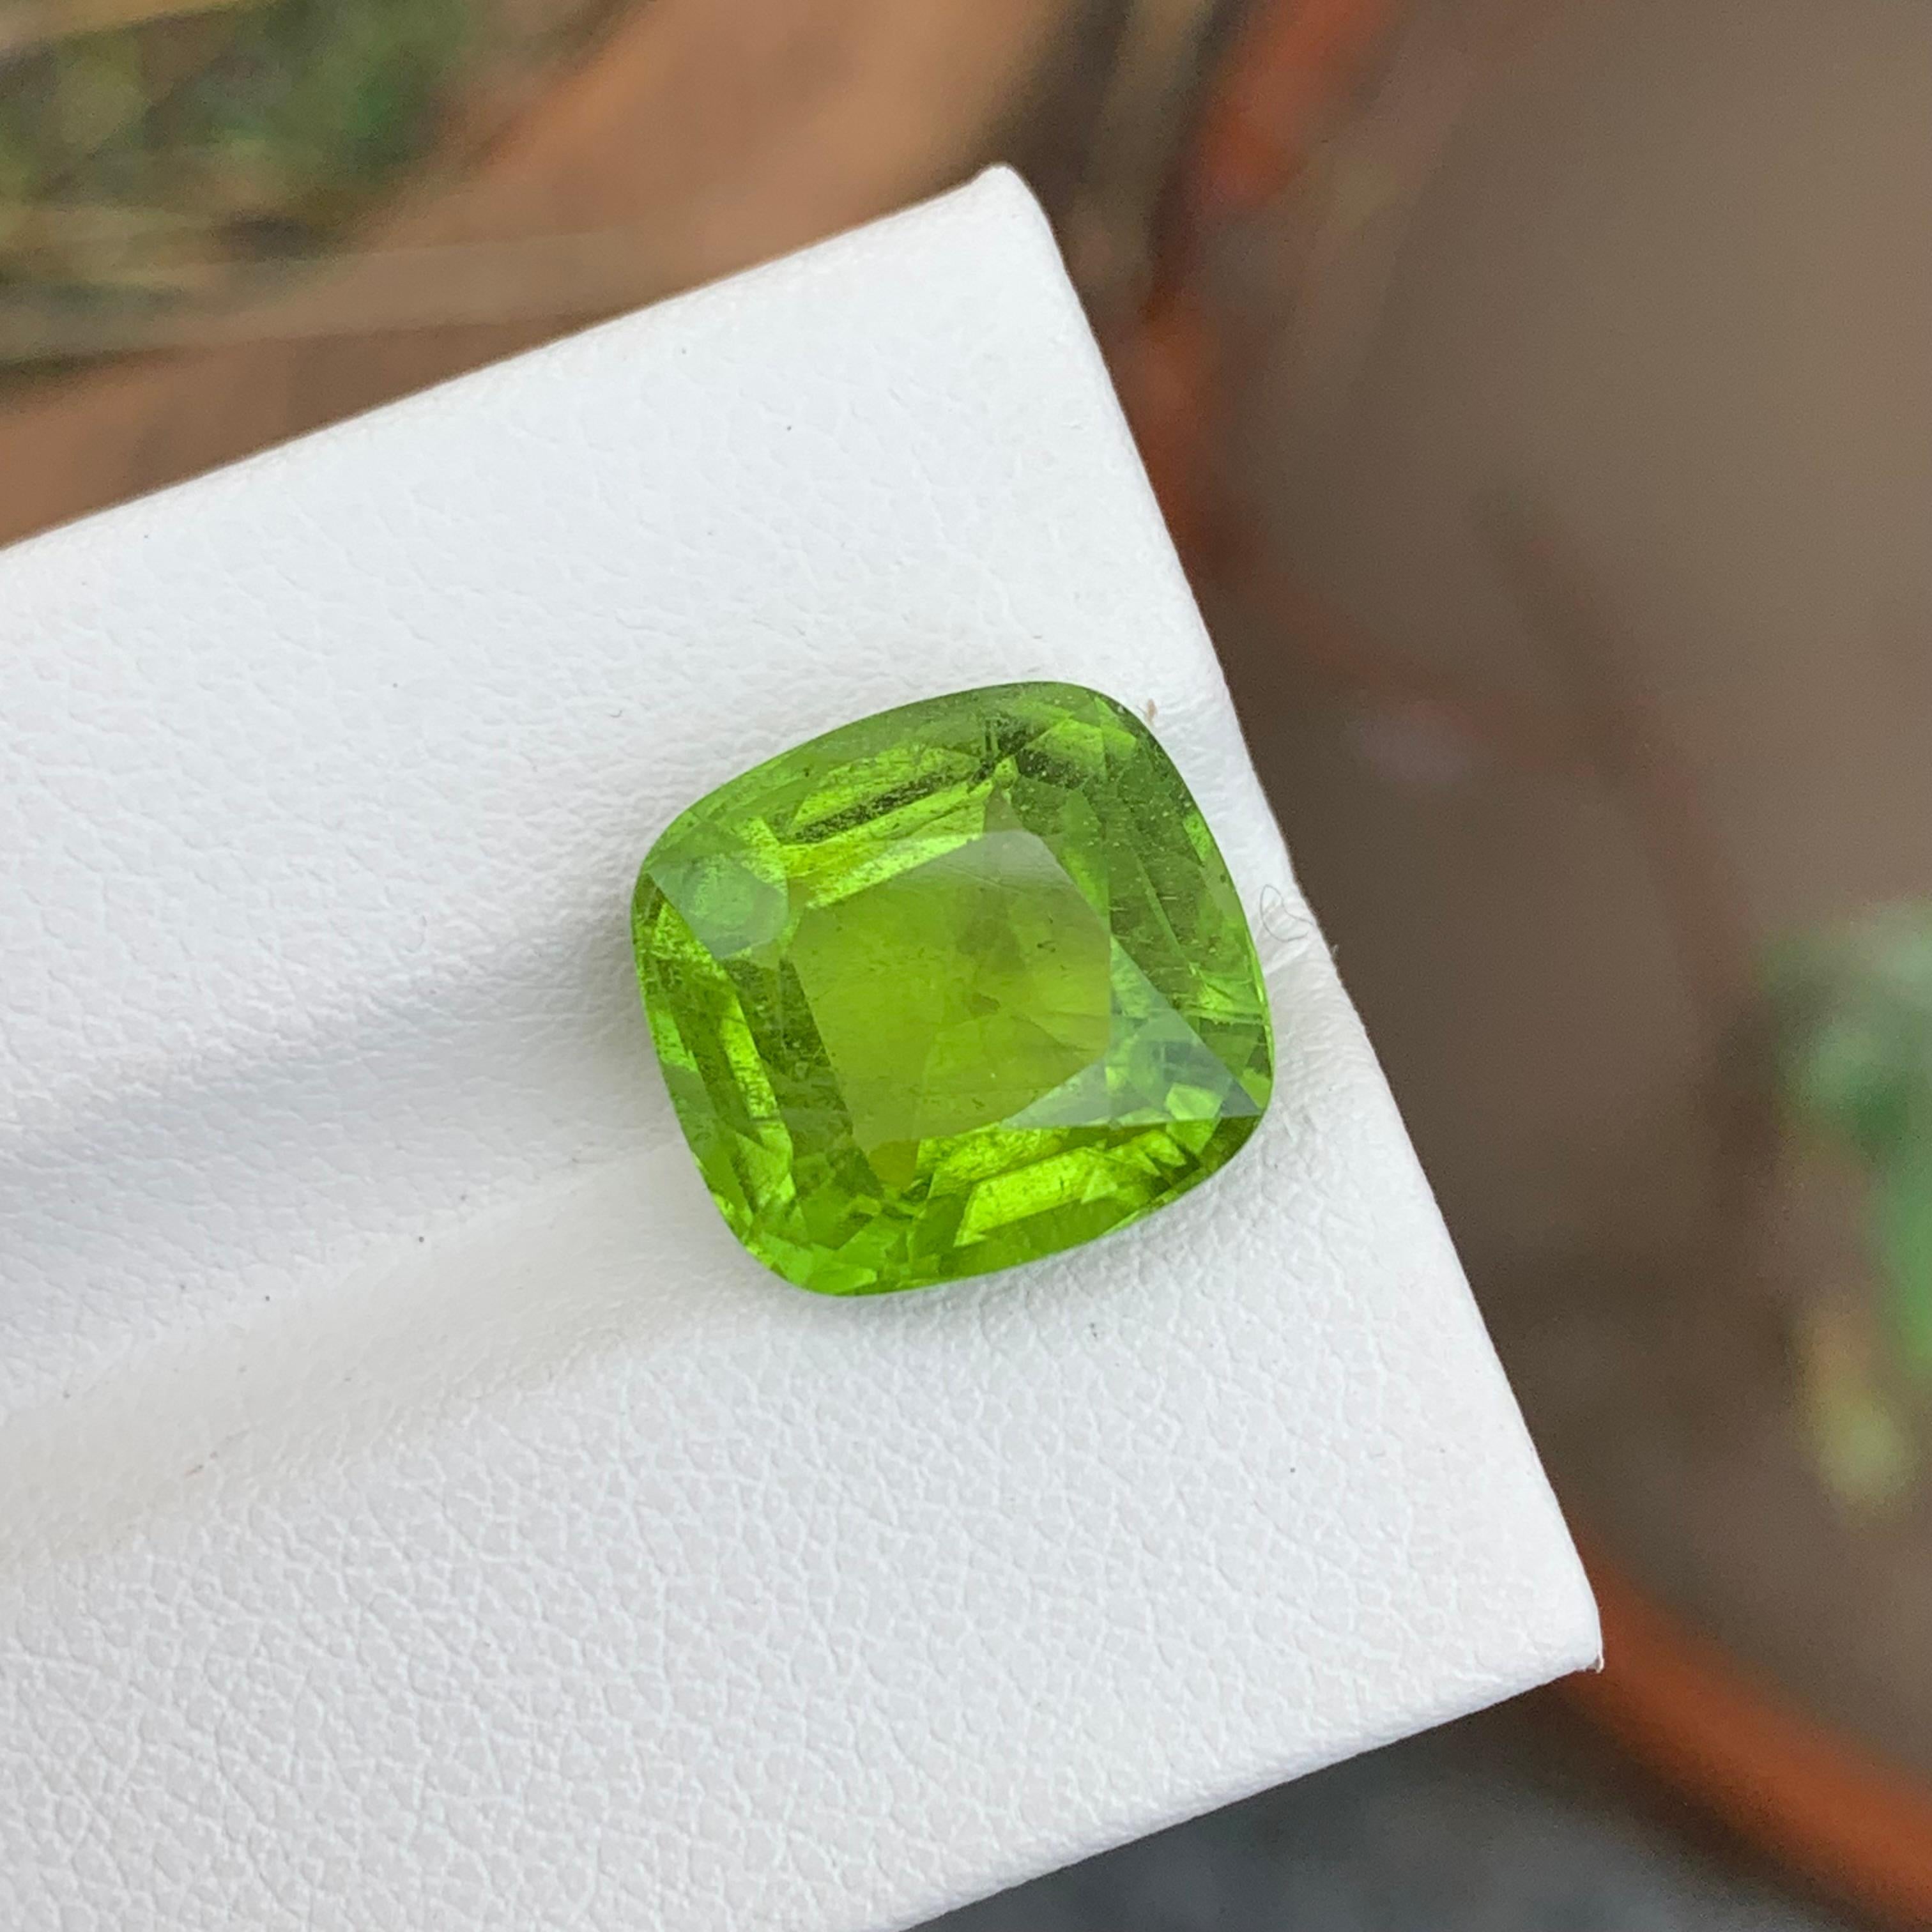 Loose Peridot
Weight: 8.85 Carats
Dimension: 12.3 x 11.7 x 7.7 Mm
Colour: Green
Origin: Supat Valley, Pakistan
Shape: Cushion 
Certificate: On Demand
Treatment: Non

Peridot, a vibrant and lustrous gemstone, has been cherished for centuries for its